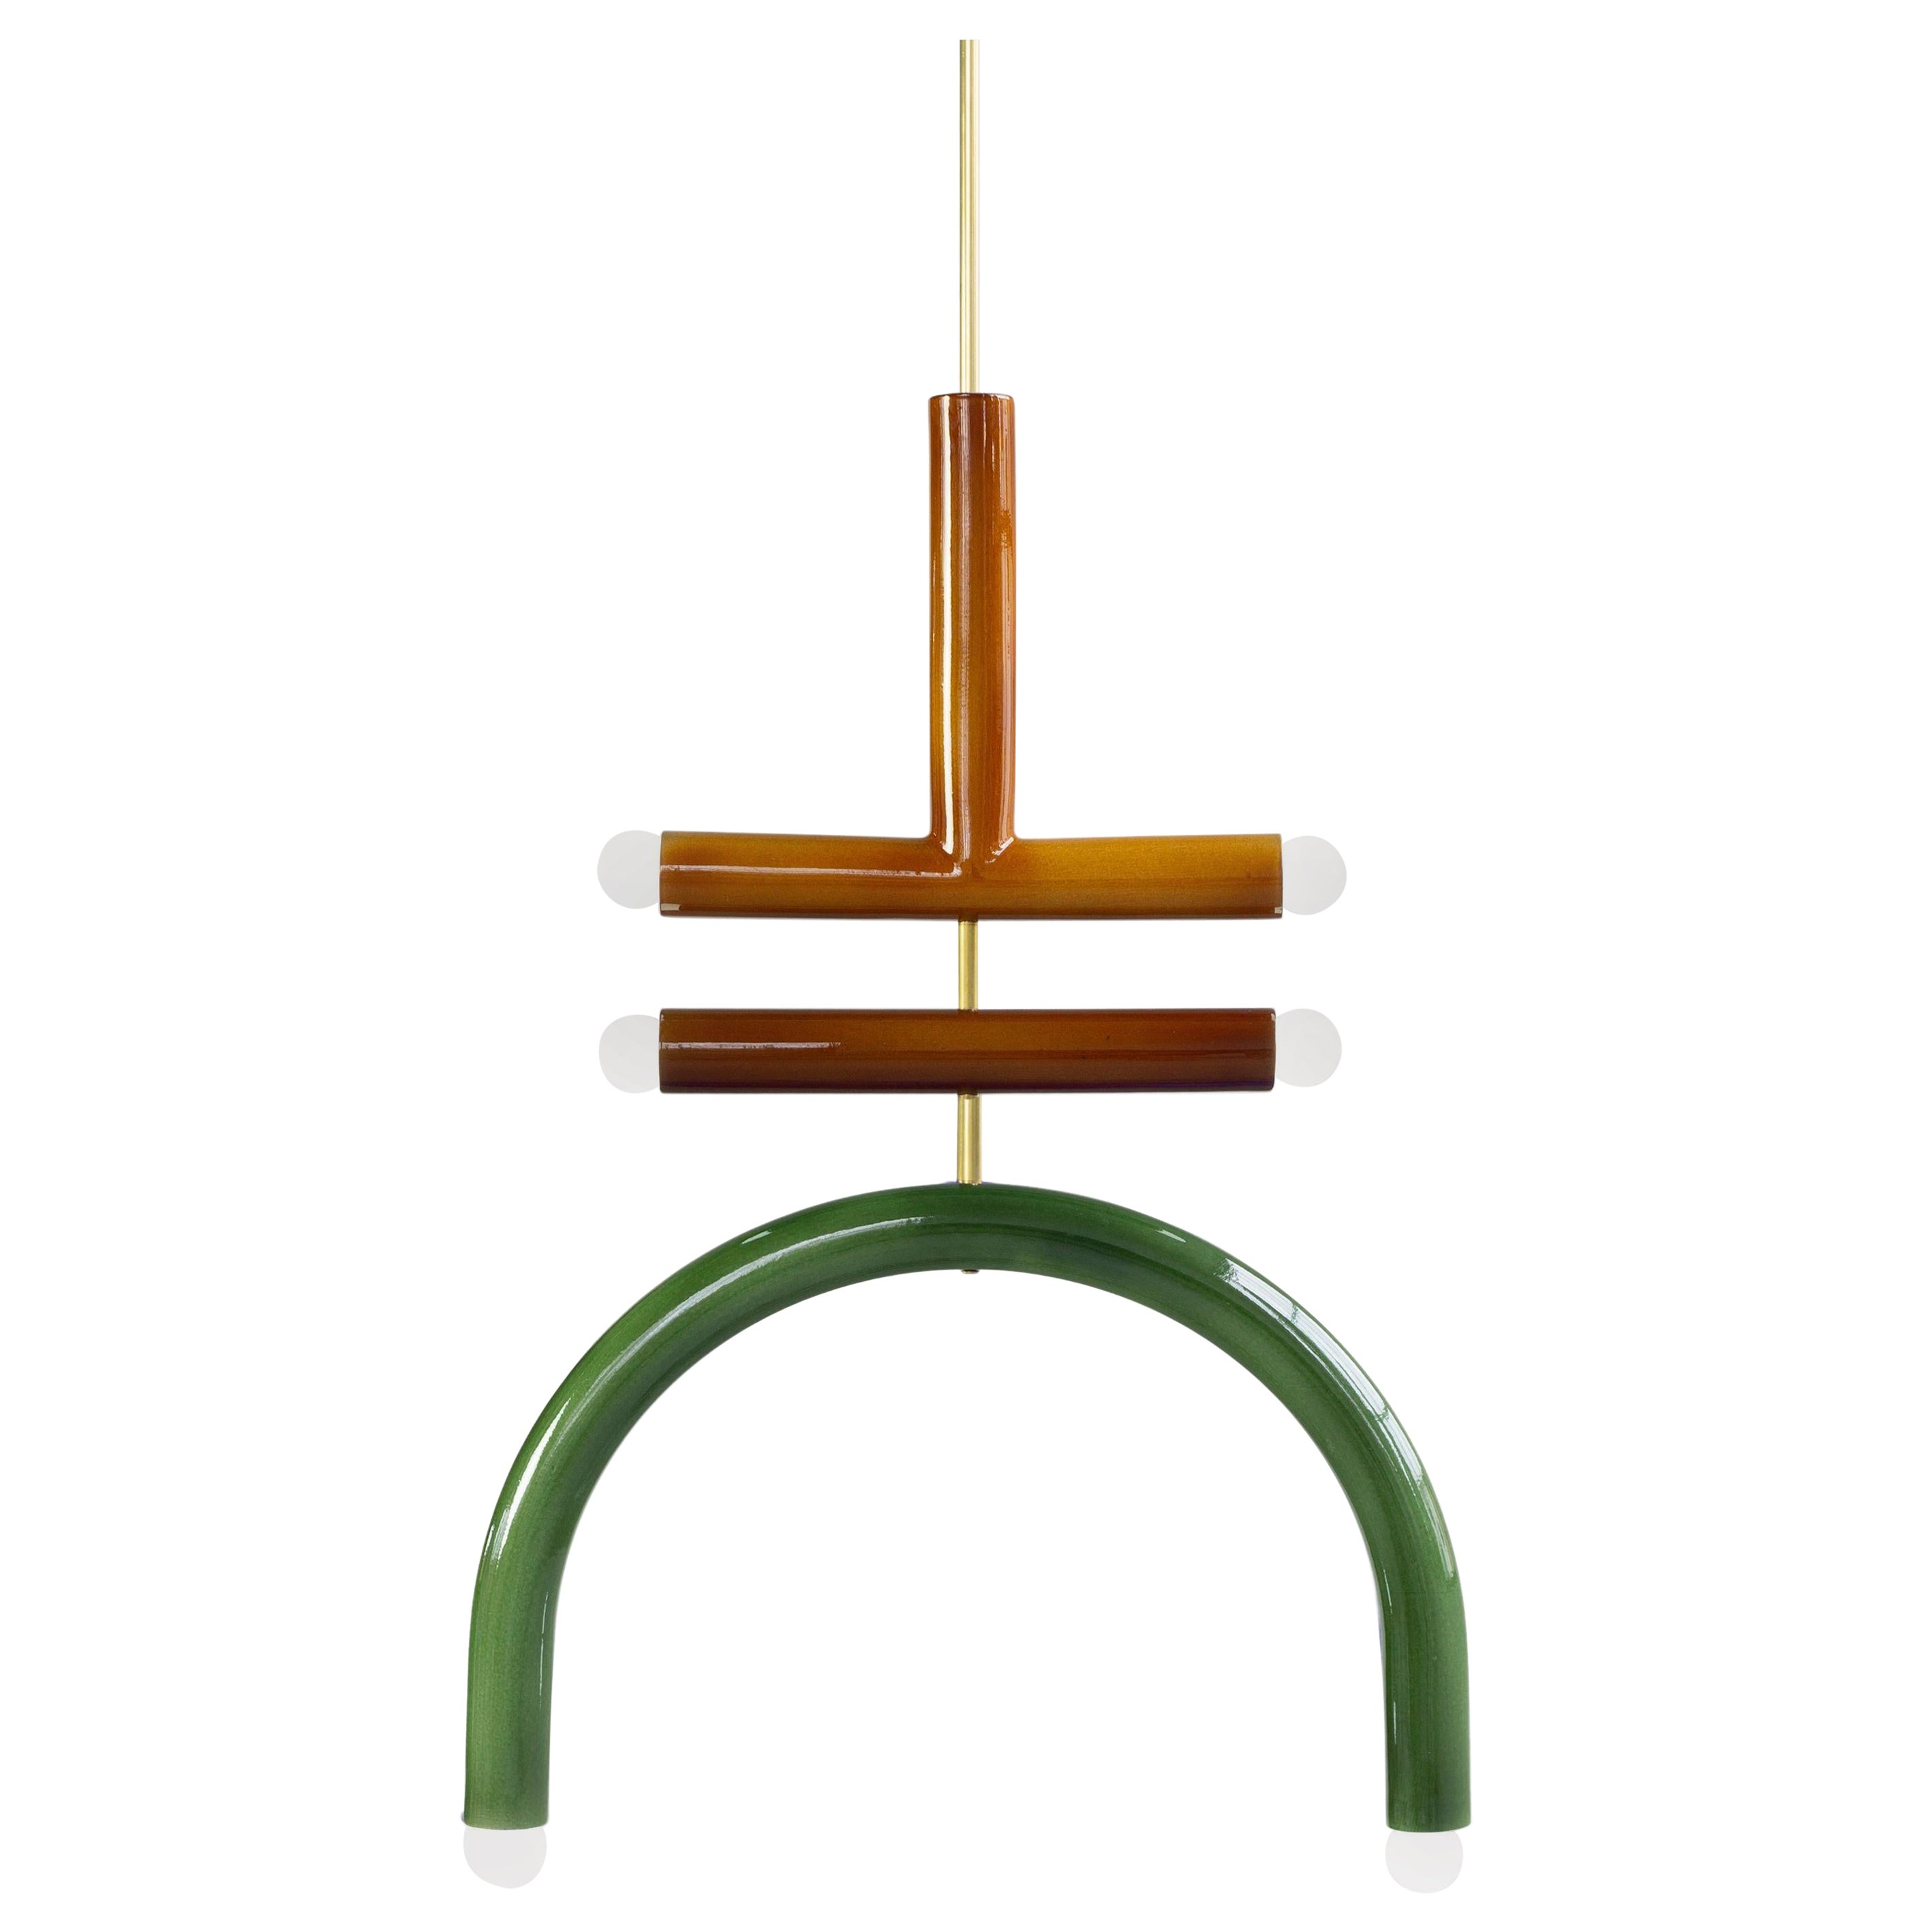 TRN F2 Pendant lamp / ceiling lamp / chandelier.
Designer: Pani Jurek.

Dimensions: H 82.5 x 55 x 5 cm.
Bulb (not included): E27/E26, compatible with US electric system.

- Ochre T
- Brown Bar
- Green Arc

Total Height: 54,5'' (= 138,4